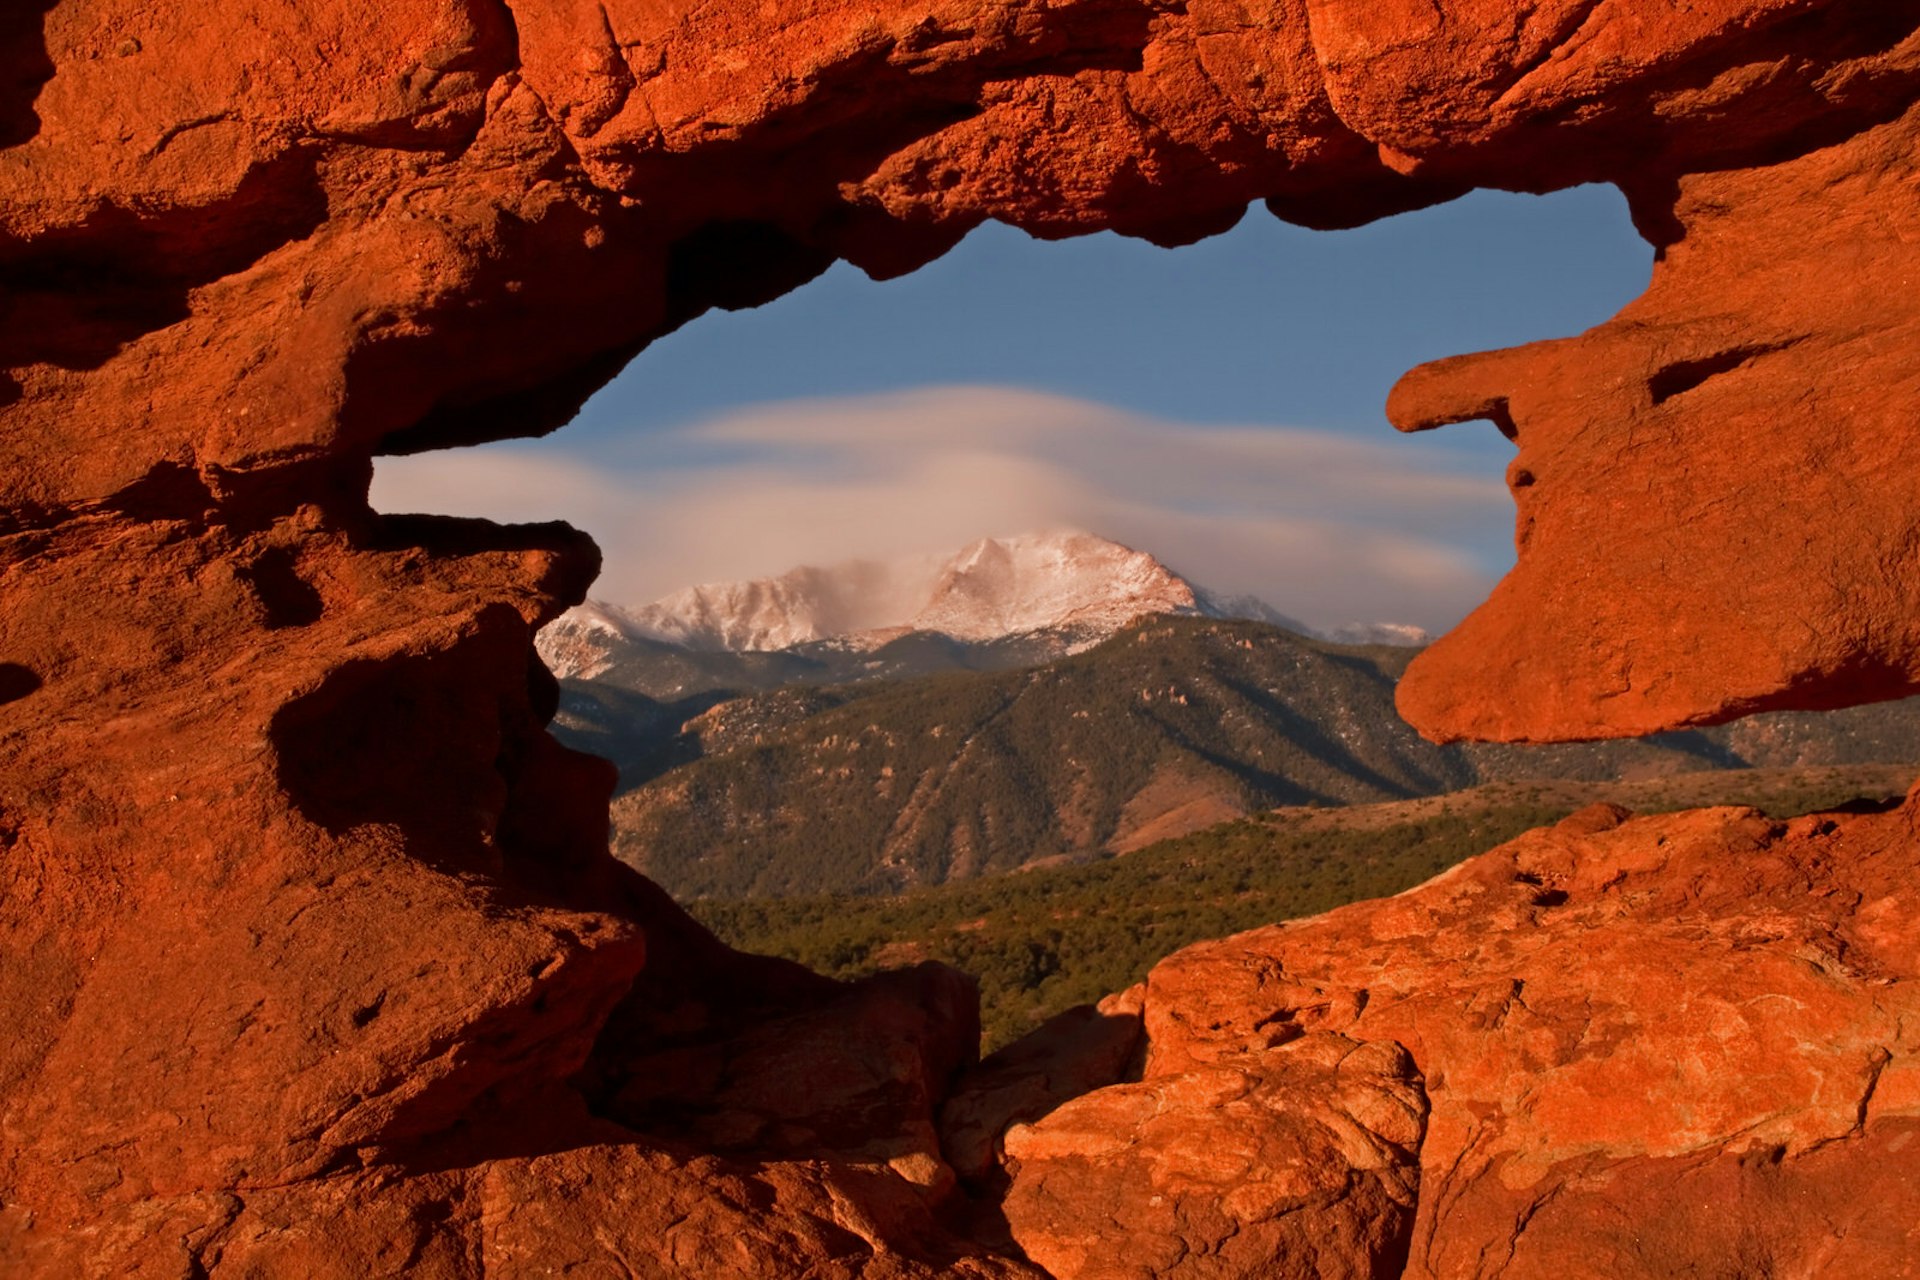 Framing up a cloudy Pikes Peak from the Siamese Twins Rock Formation at Garden of the Gods, Colorado © Ronda Kimbrow / Getty Images